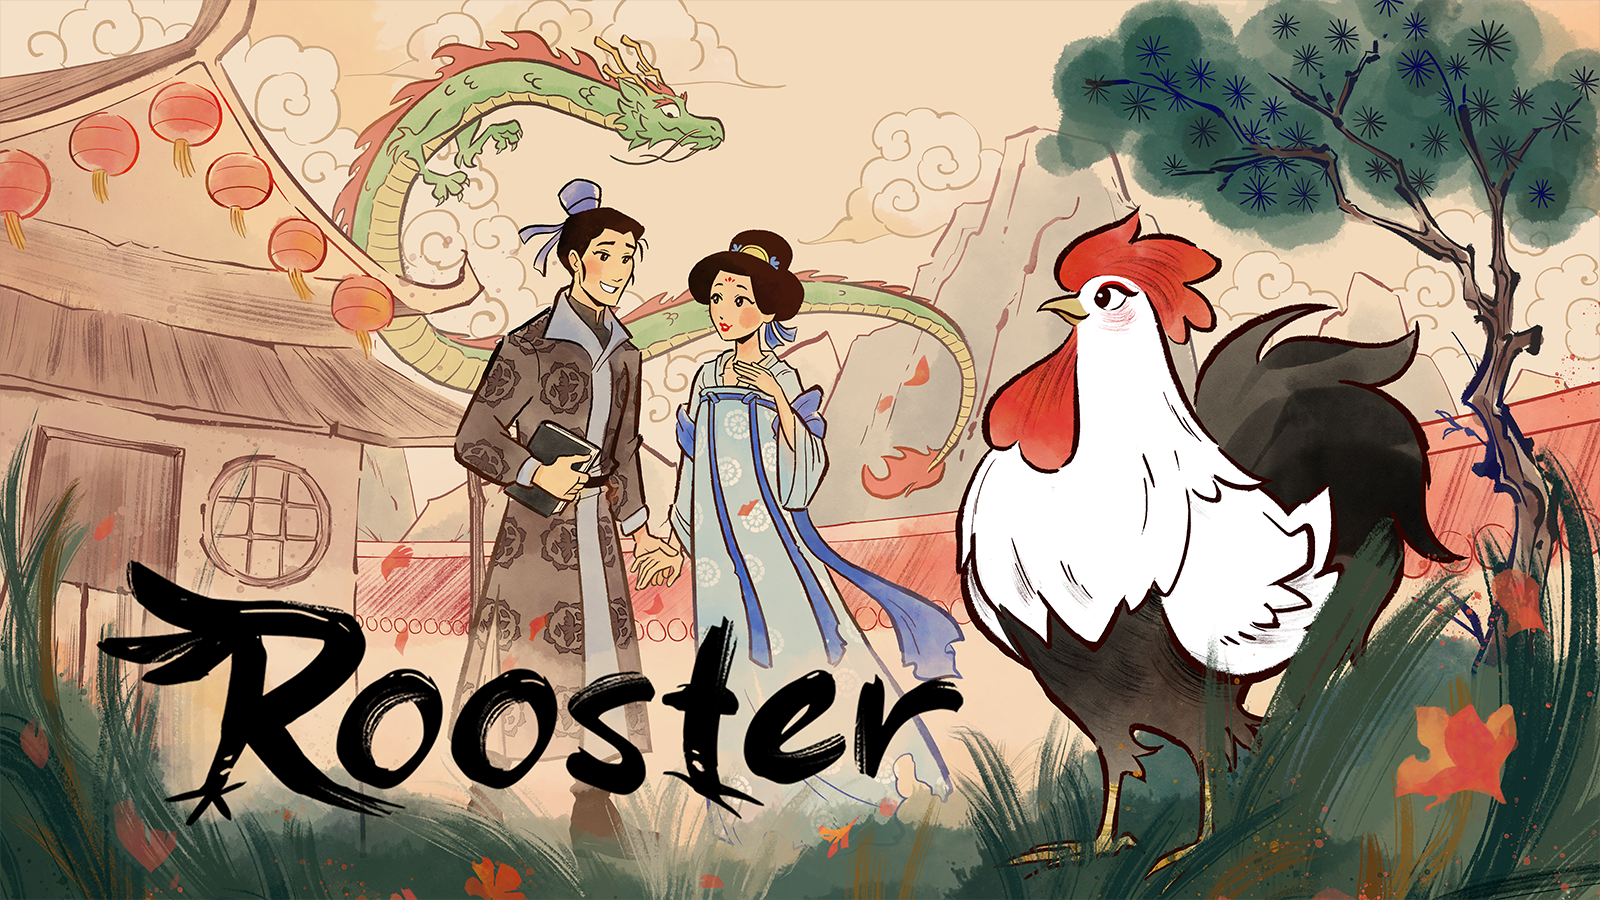 A rooster, a man and woman dressed in traditional Chinese clothing, and a dragon all drawn in brushstrokes. They are surrounded by a pagoda strung up with lanterns, a gray mountain, and wispy clouds.